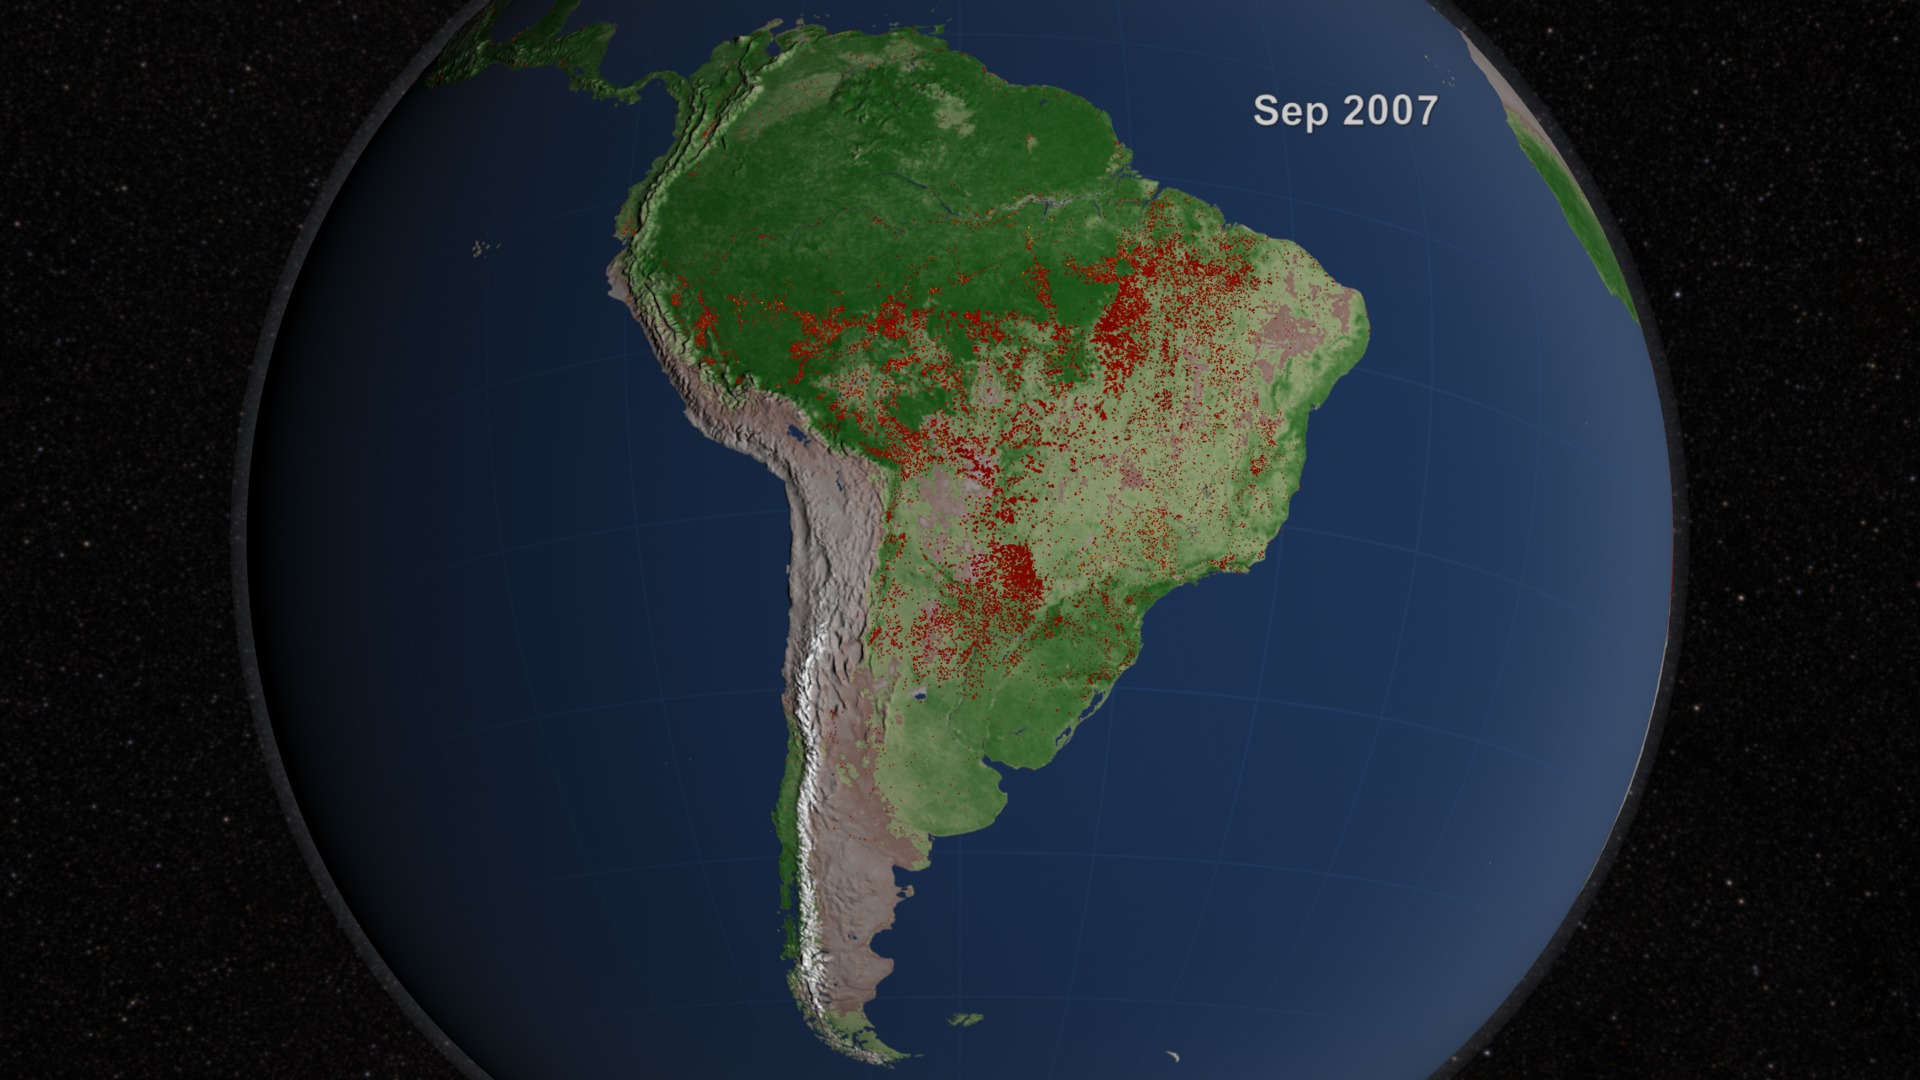 This animation shows fires over MODIS NDVI in South America from July 2002 through July 2011.  The still image seen here is from July 15, 2007 where fires scorched more than 3 million acres.  Naturally ocurring fires are not uncommon in the drier forests and grasslands of South America, but this type of intense, continent-spanning fire activity is almost certainly a product of human activities.